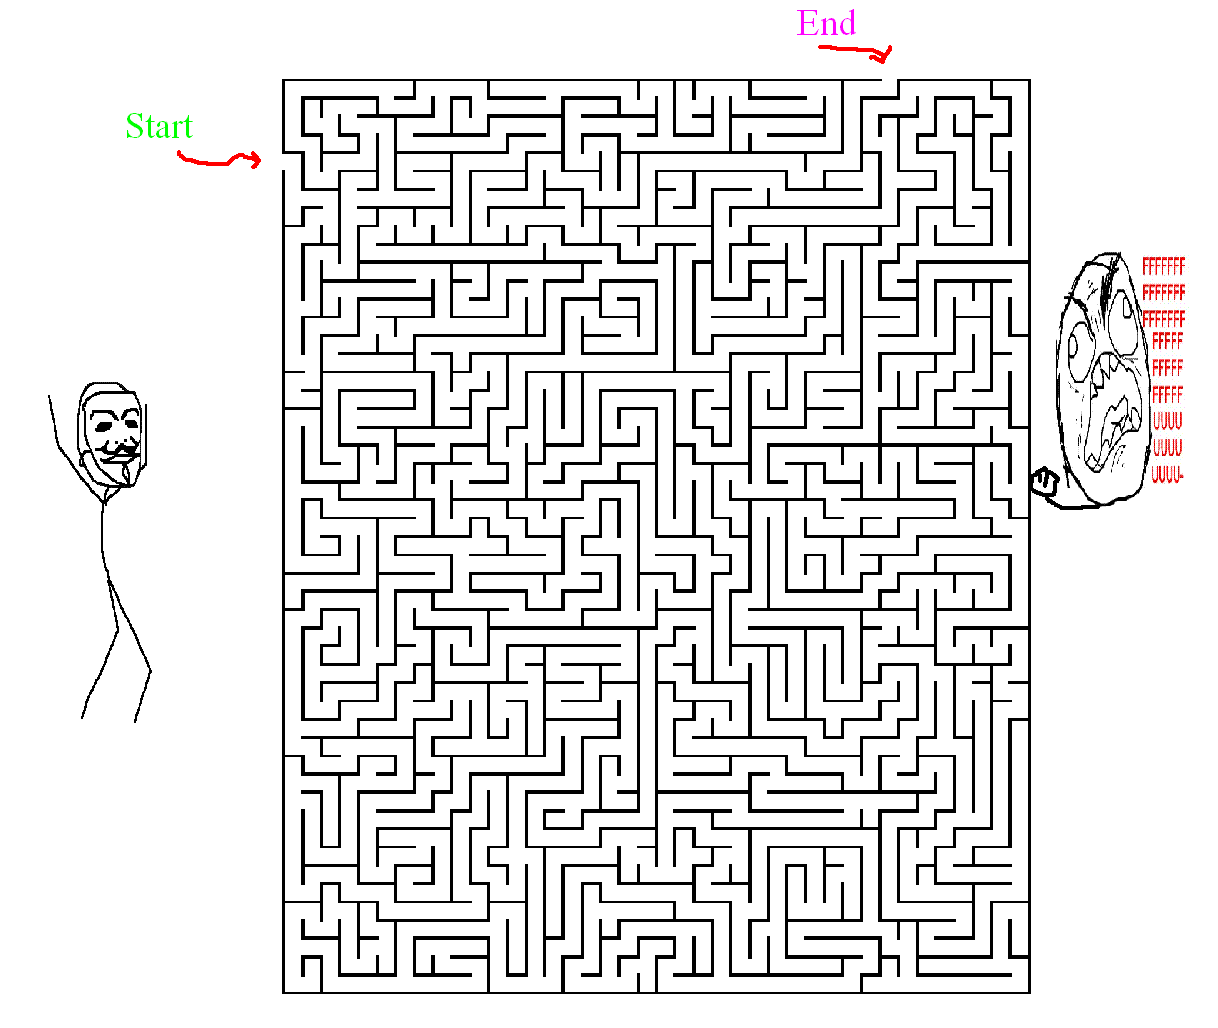 The nearly Impossible Maze